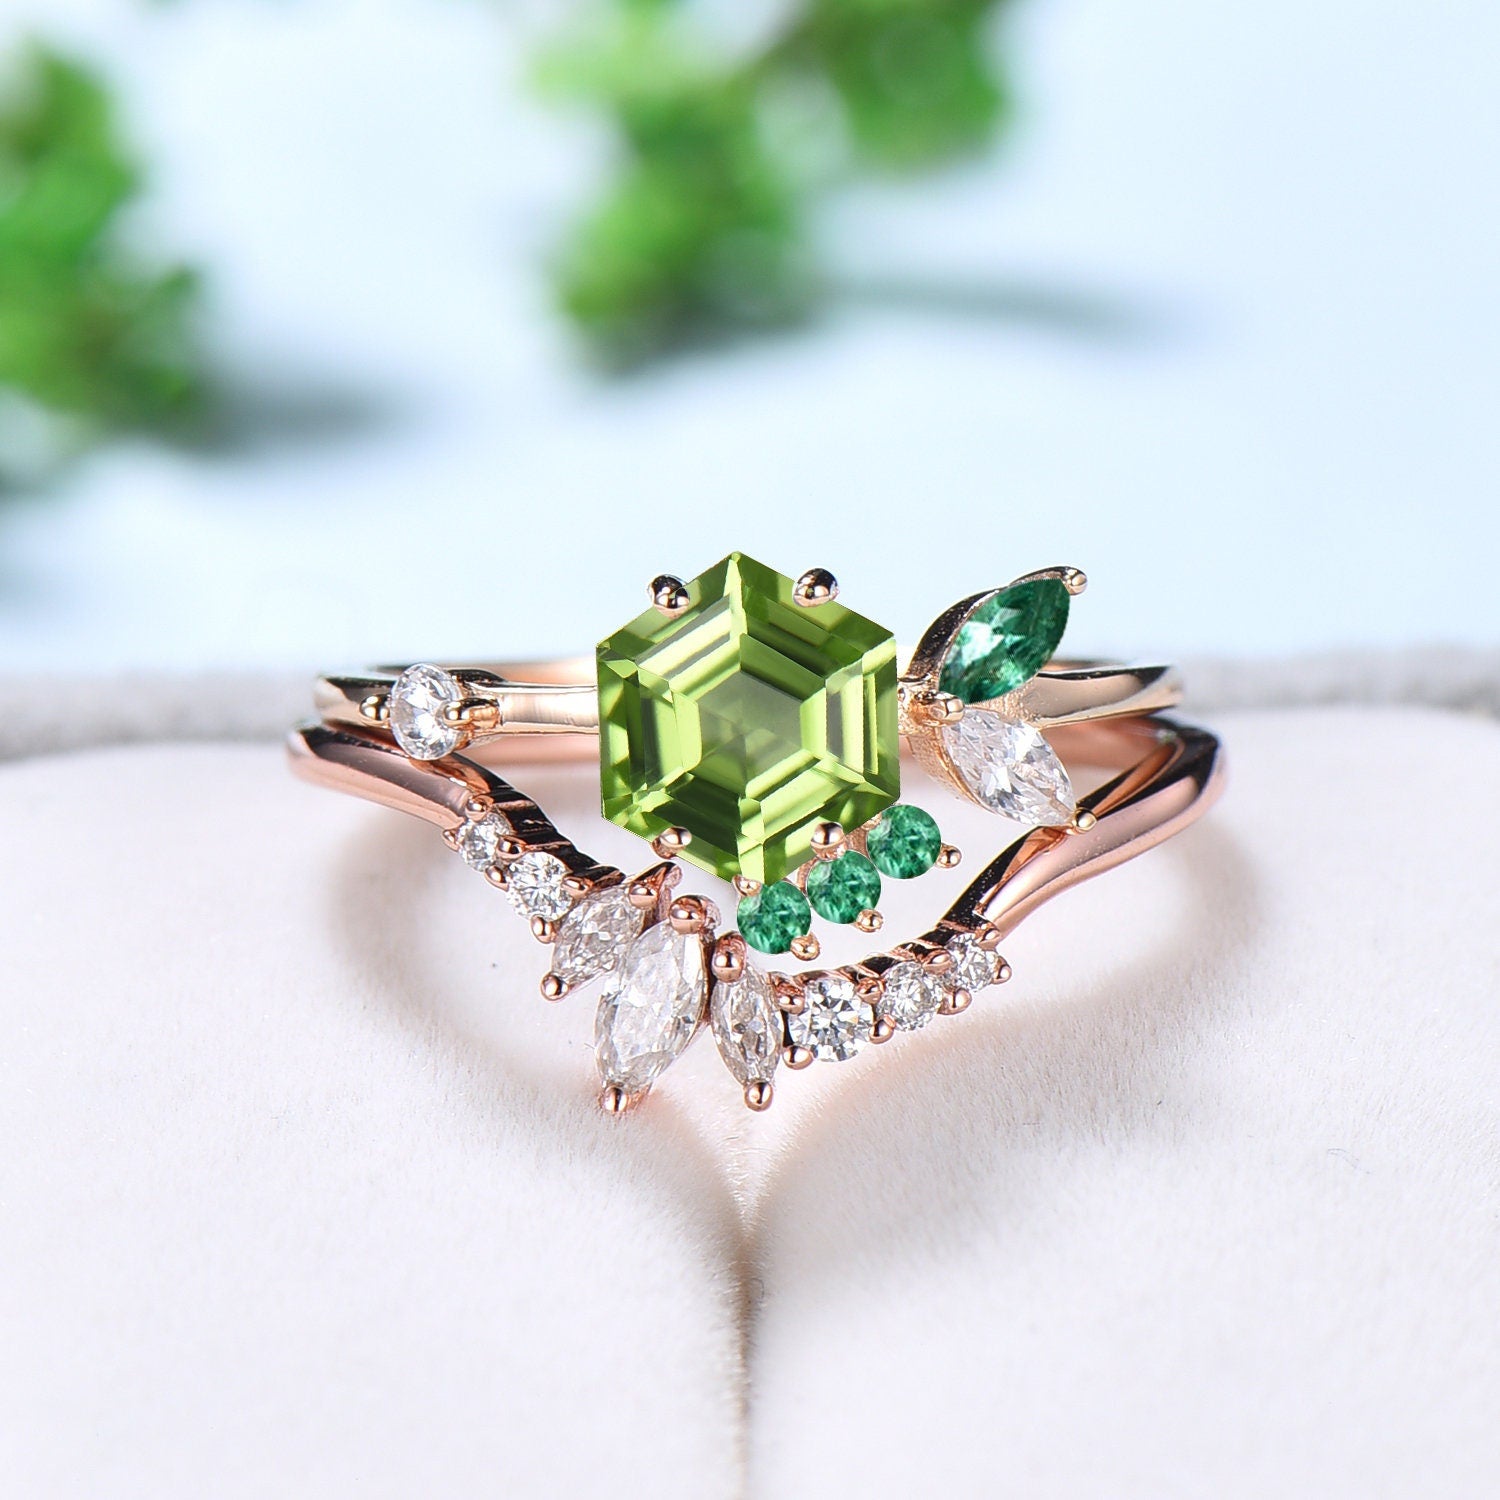 Unique Peridot and Emerald Ring Vintage Hexagon Peridot Engagement Ring Set Unique Cluster Moissanite Wedding Set Art Deco Anniversary Gift - PENFINE